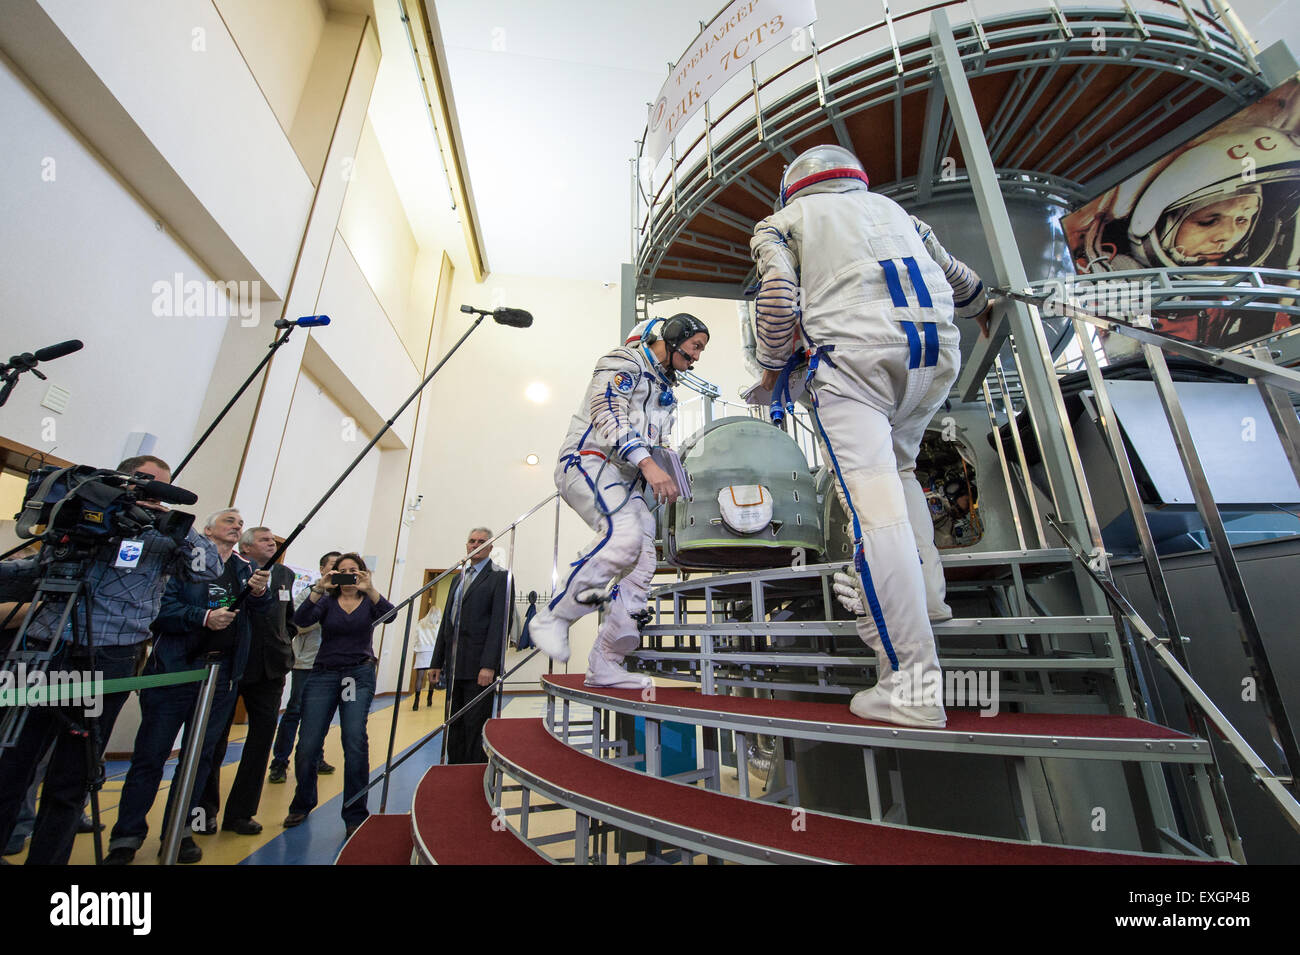 NASA astronaut Kjell Lindgren, left, Russian cosmonaut Oleg Kononenko, right, and Japan Aerospace Exploration Agency astronaut Kimiya Yui participate in the second day of qualification exams, Thursday, May 7, 2015 at the Gagarin Cosmonaut Training Center (GCTC) in Star City, Russia. The Expedition 44/45 trio is preparing for launch to the International Space Station in their Soyuz TMA-17M spacecraft from the Baikonur Cosmodrome in Kazakhstan. Stock Photo